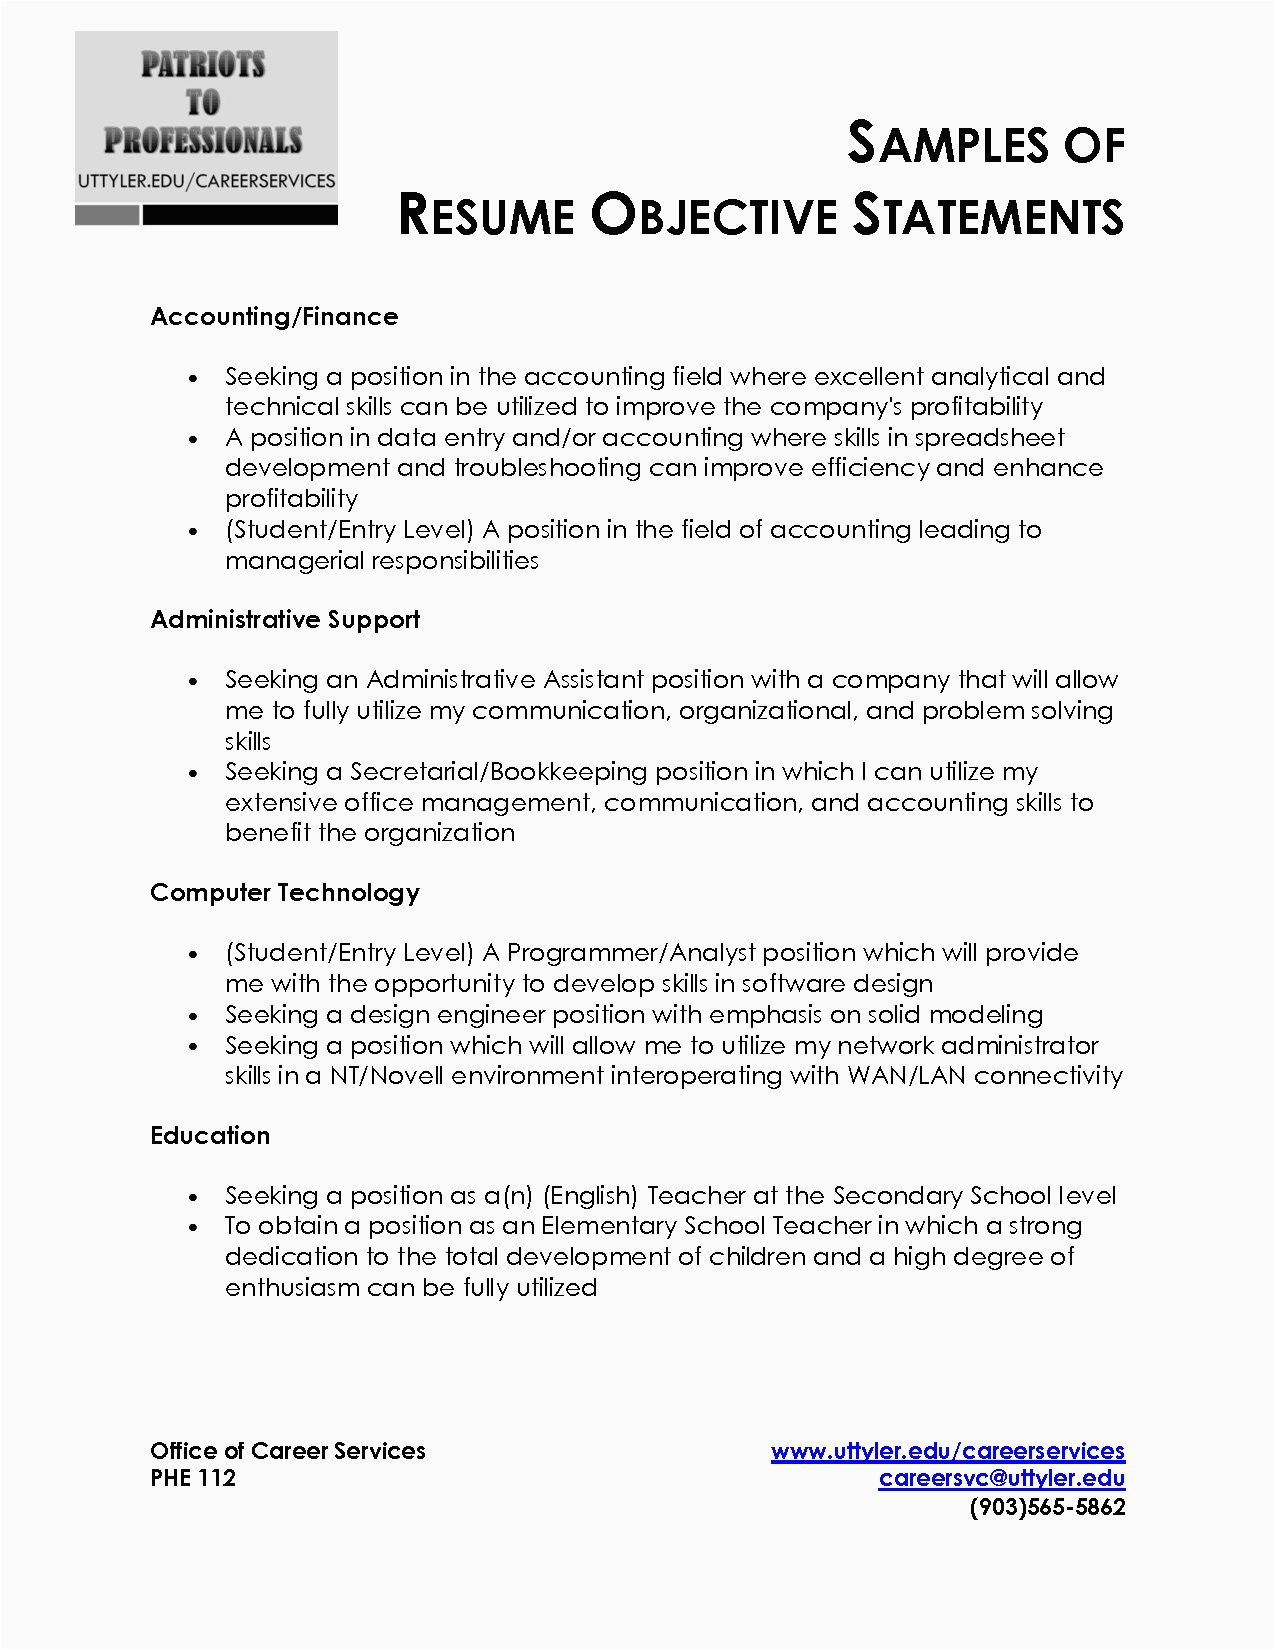 Sample Objective Purpose Statement for Resume Sample Resume Objective Statement Free Resume Templates